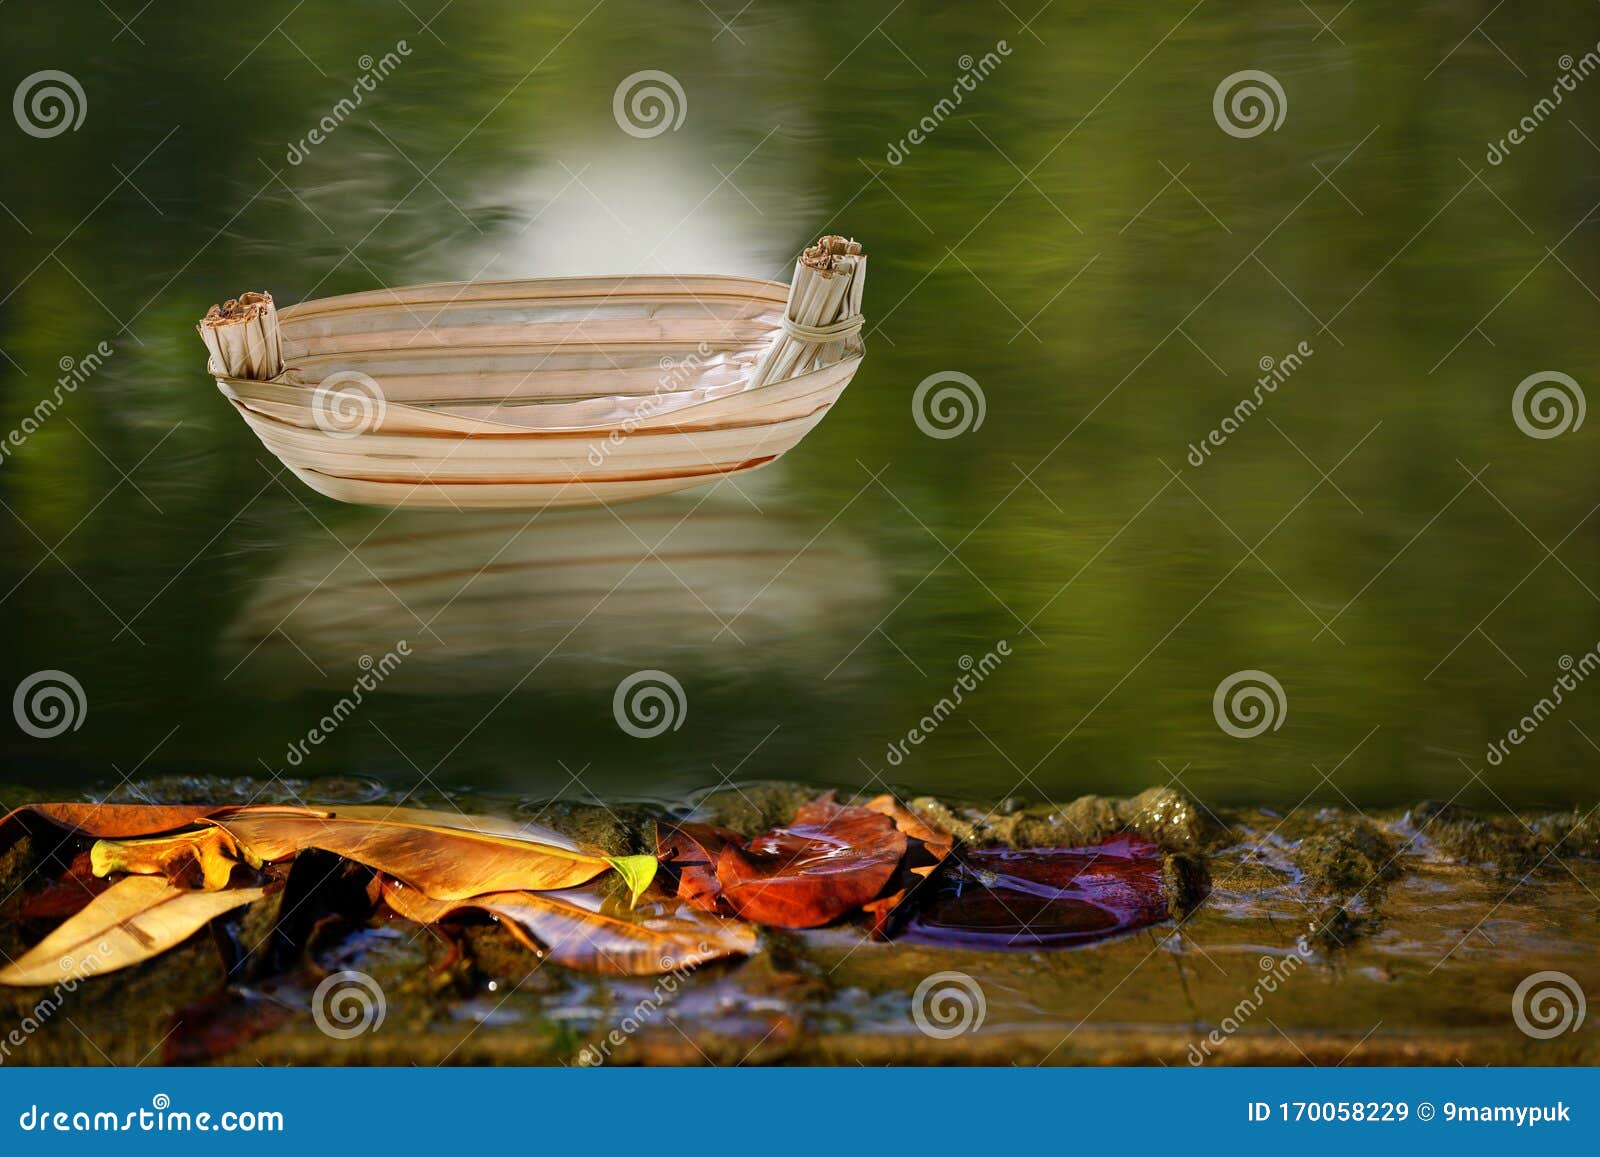 Boat Empty from Dry Leaf Float on Water Surface with Reflection